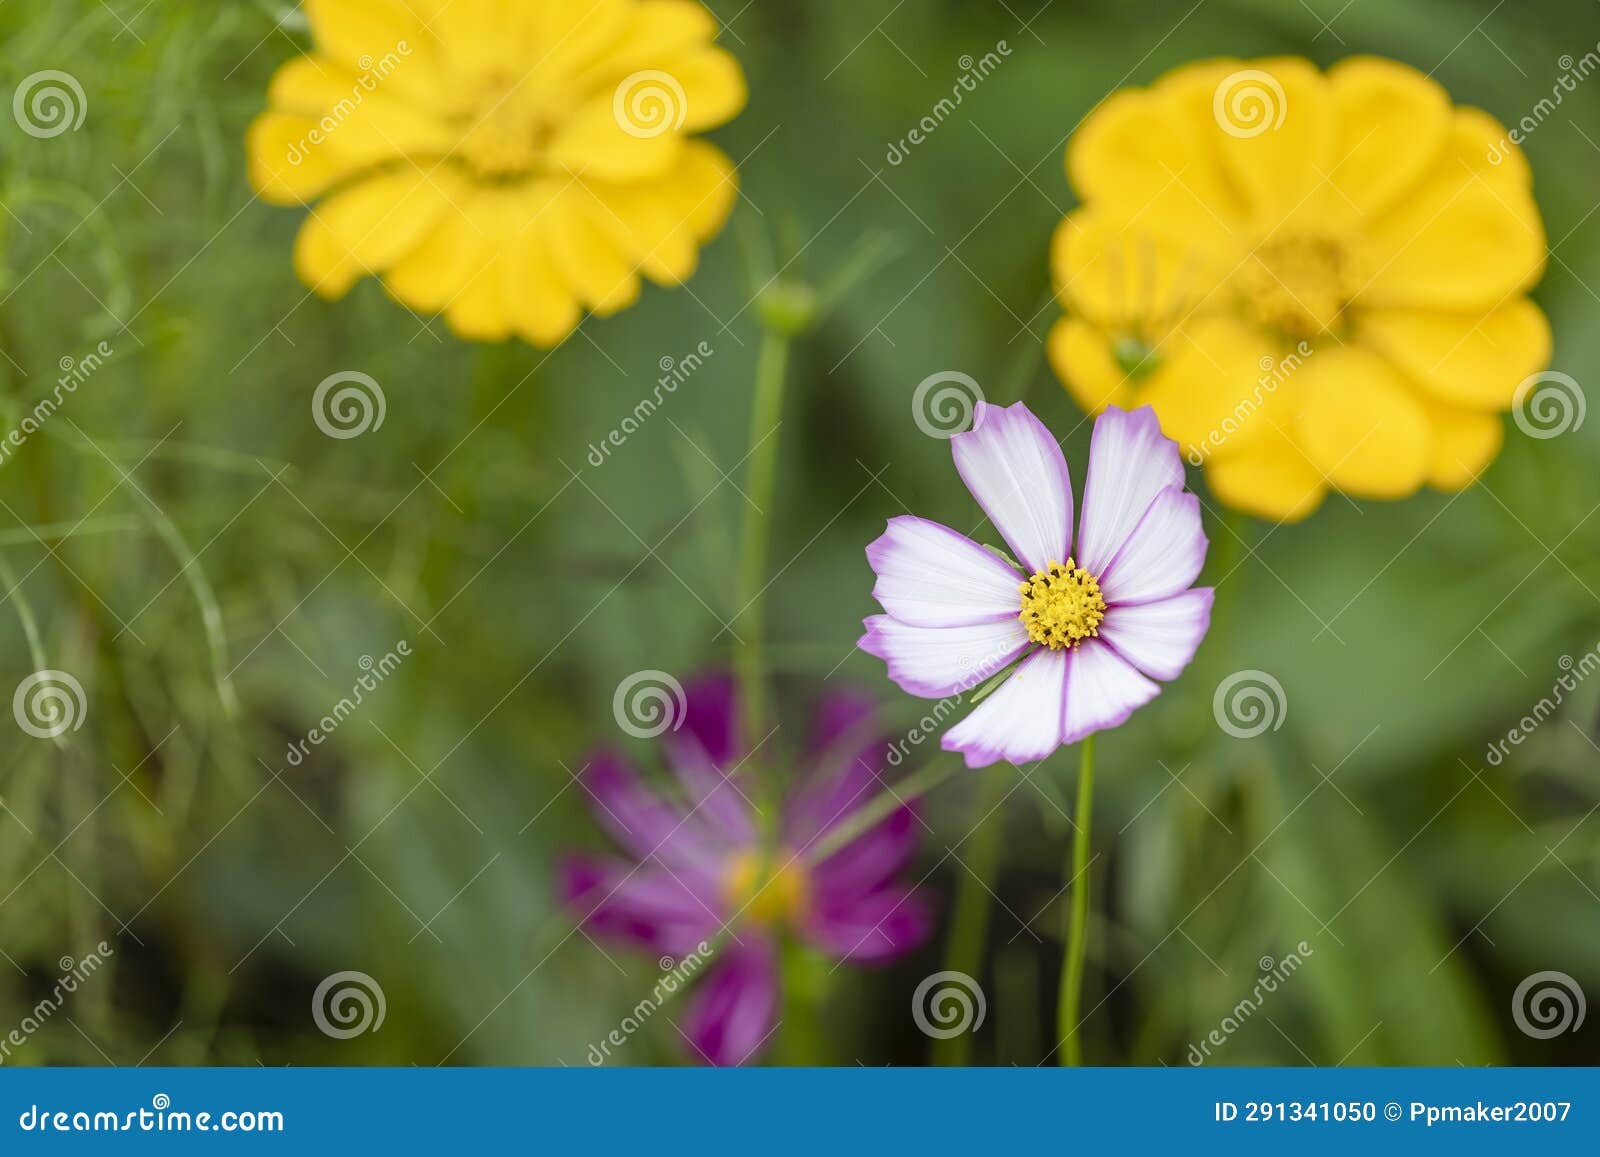 the white flowers of the cosmea